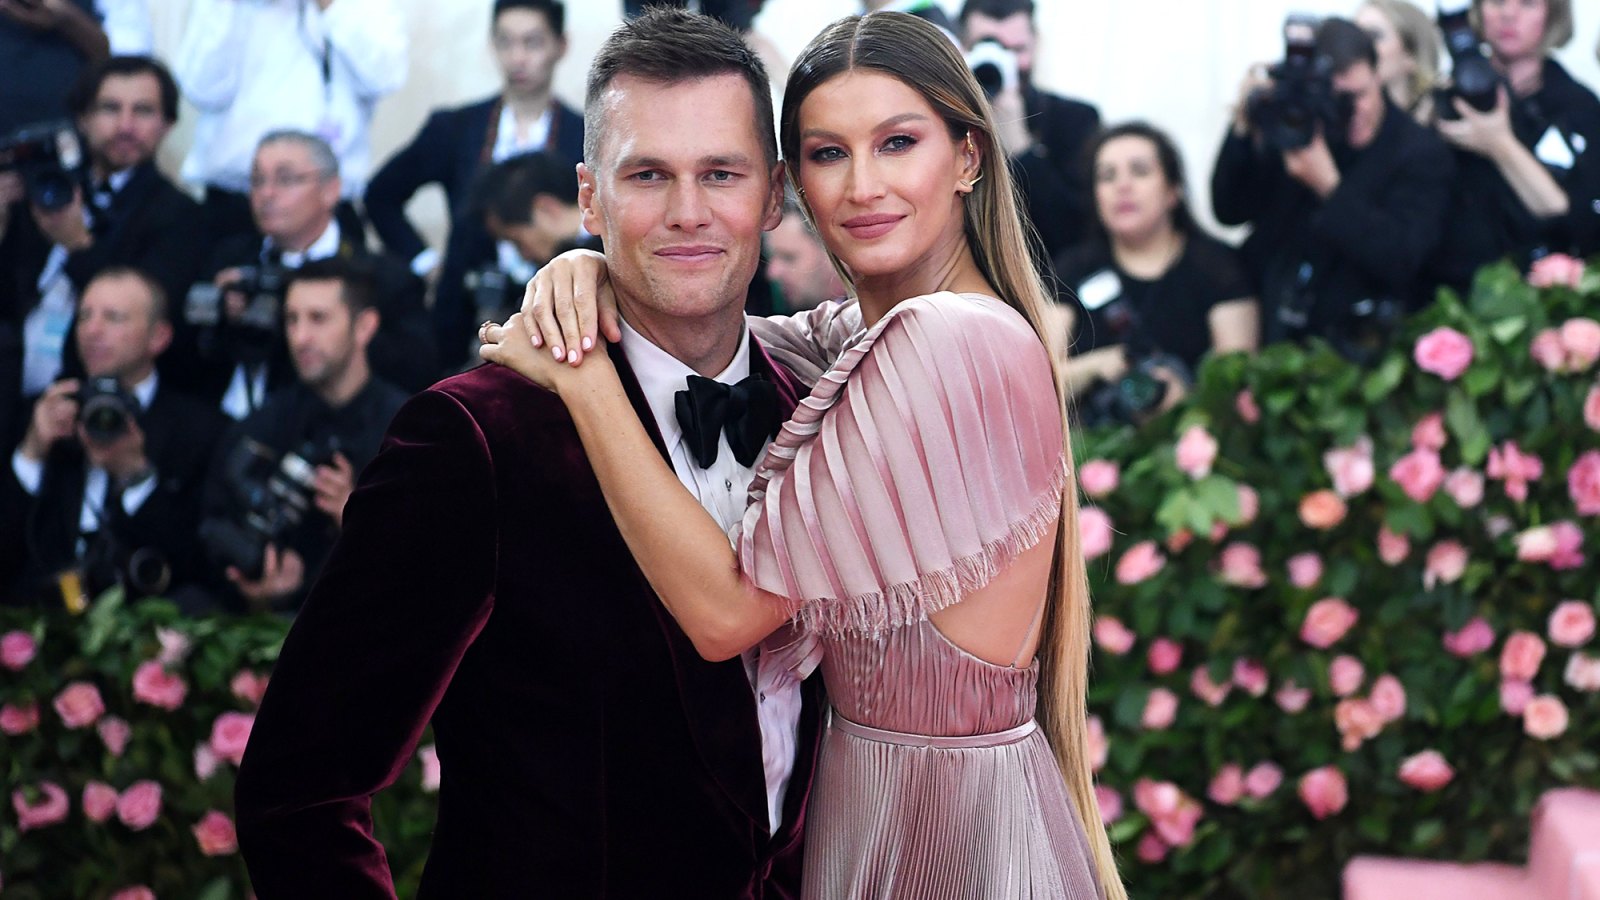 Tom Brady Calls Gisele Bundchen 'The Best Thing That Ever Happened' to Him on 13th Wedding Anniversary